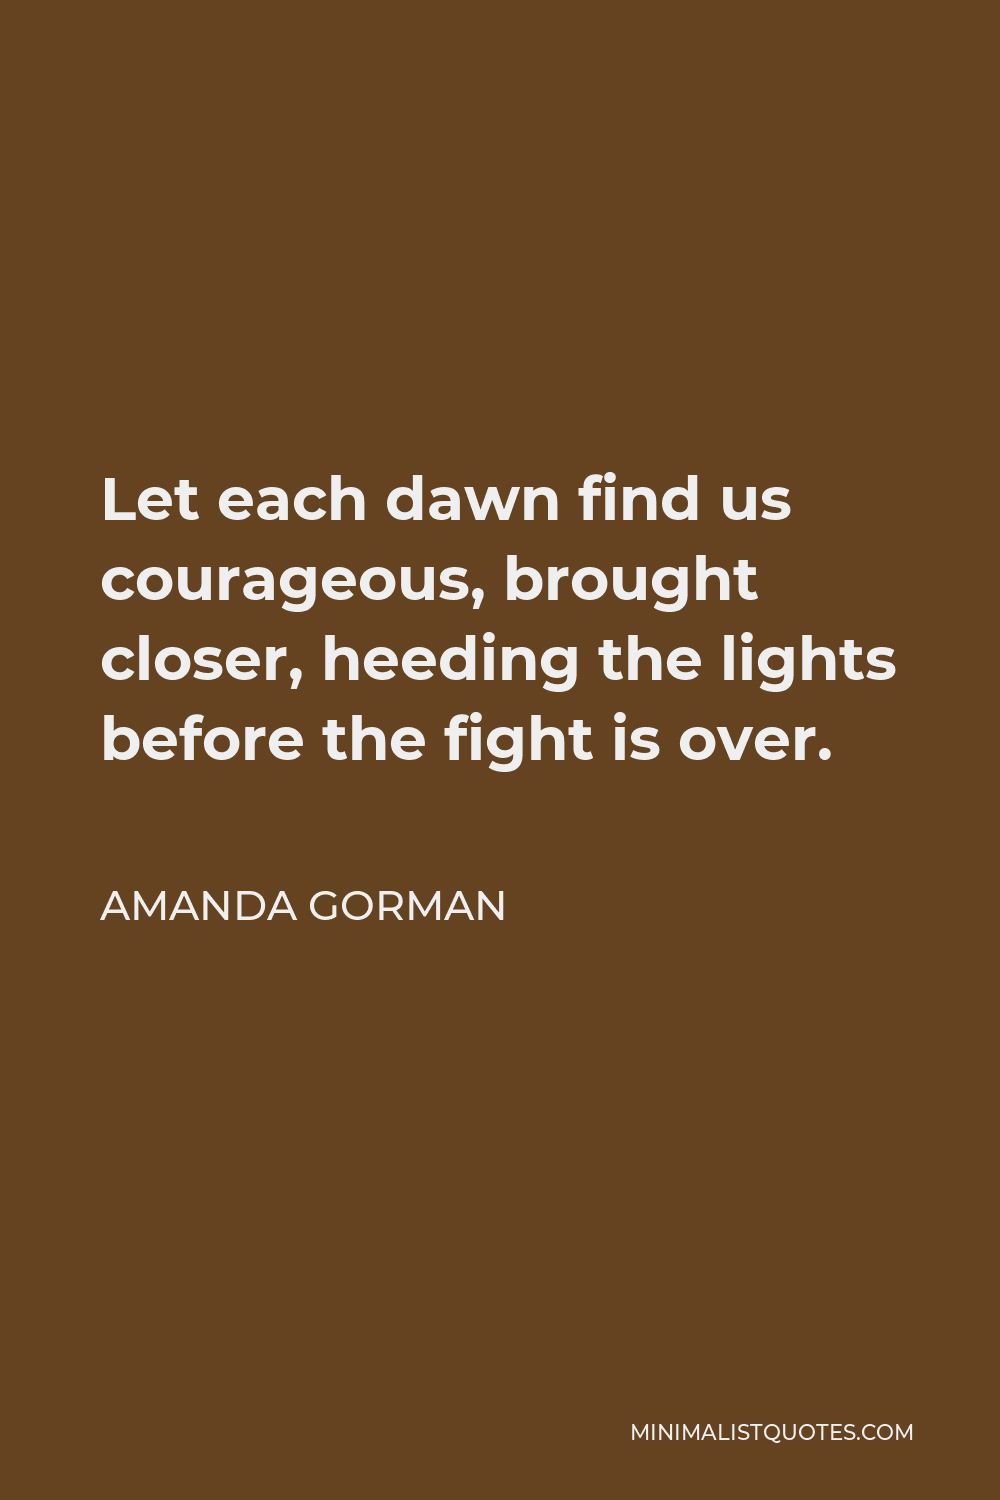 Amanda Gorman Quote - Let each dawn find us courageous, brought closer, heeding the lights before the fight is over.